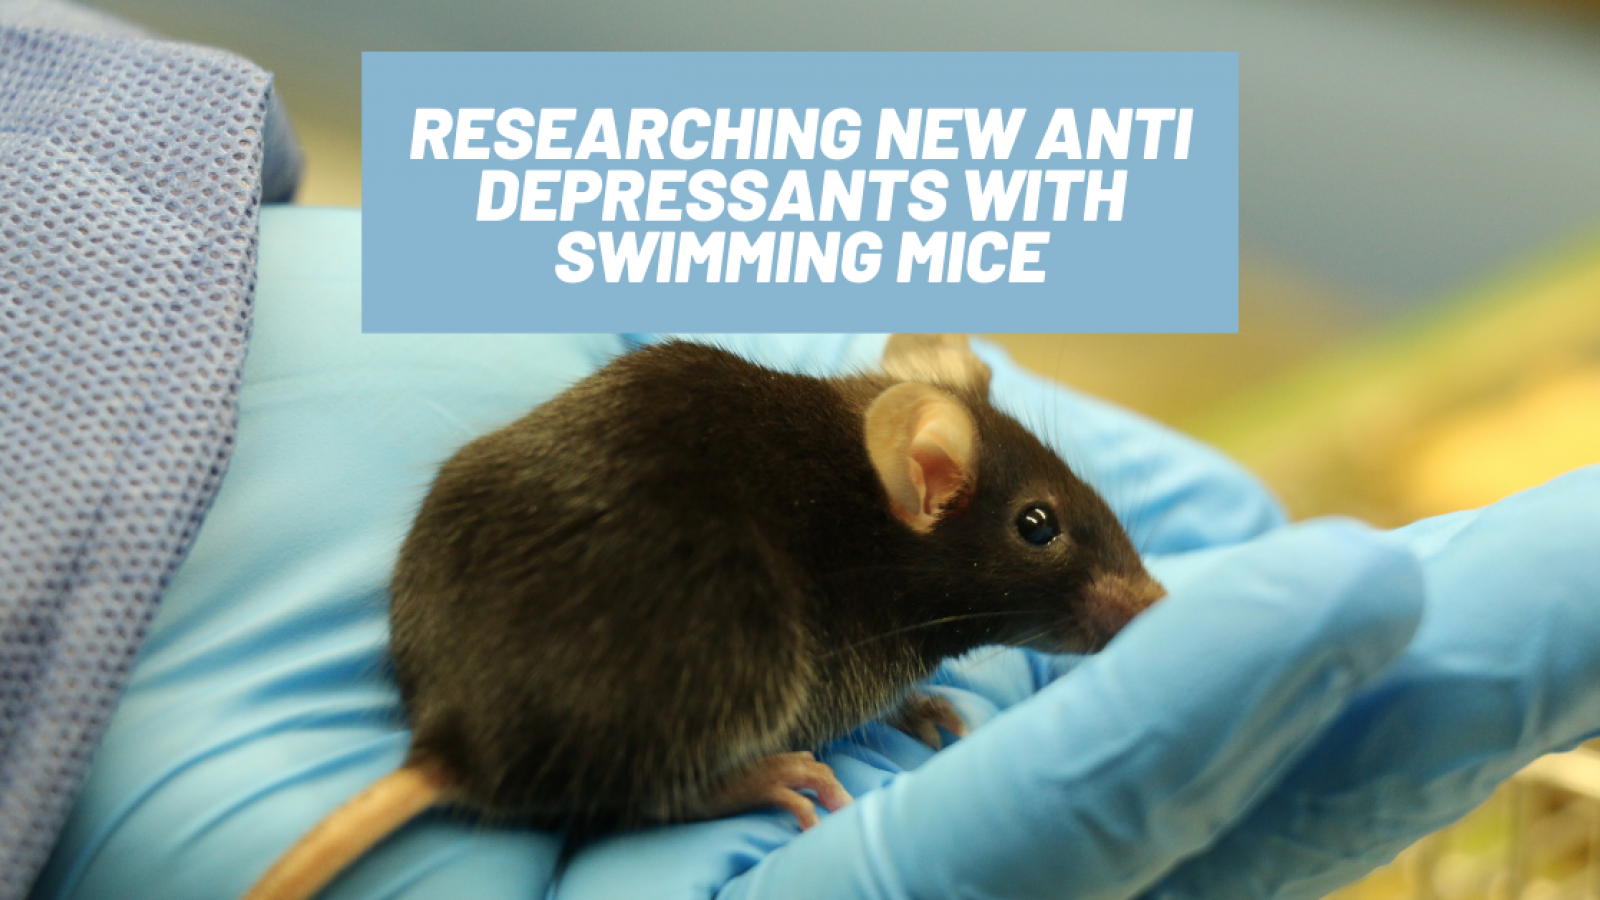 Researching new antidepressants with swimming mice